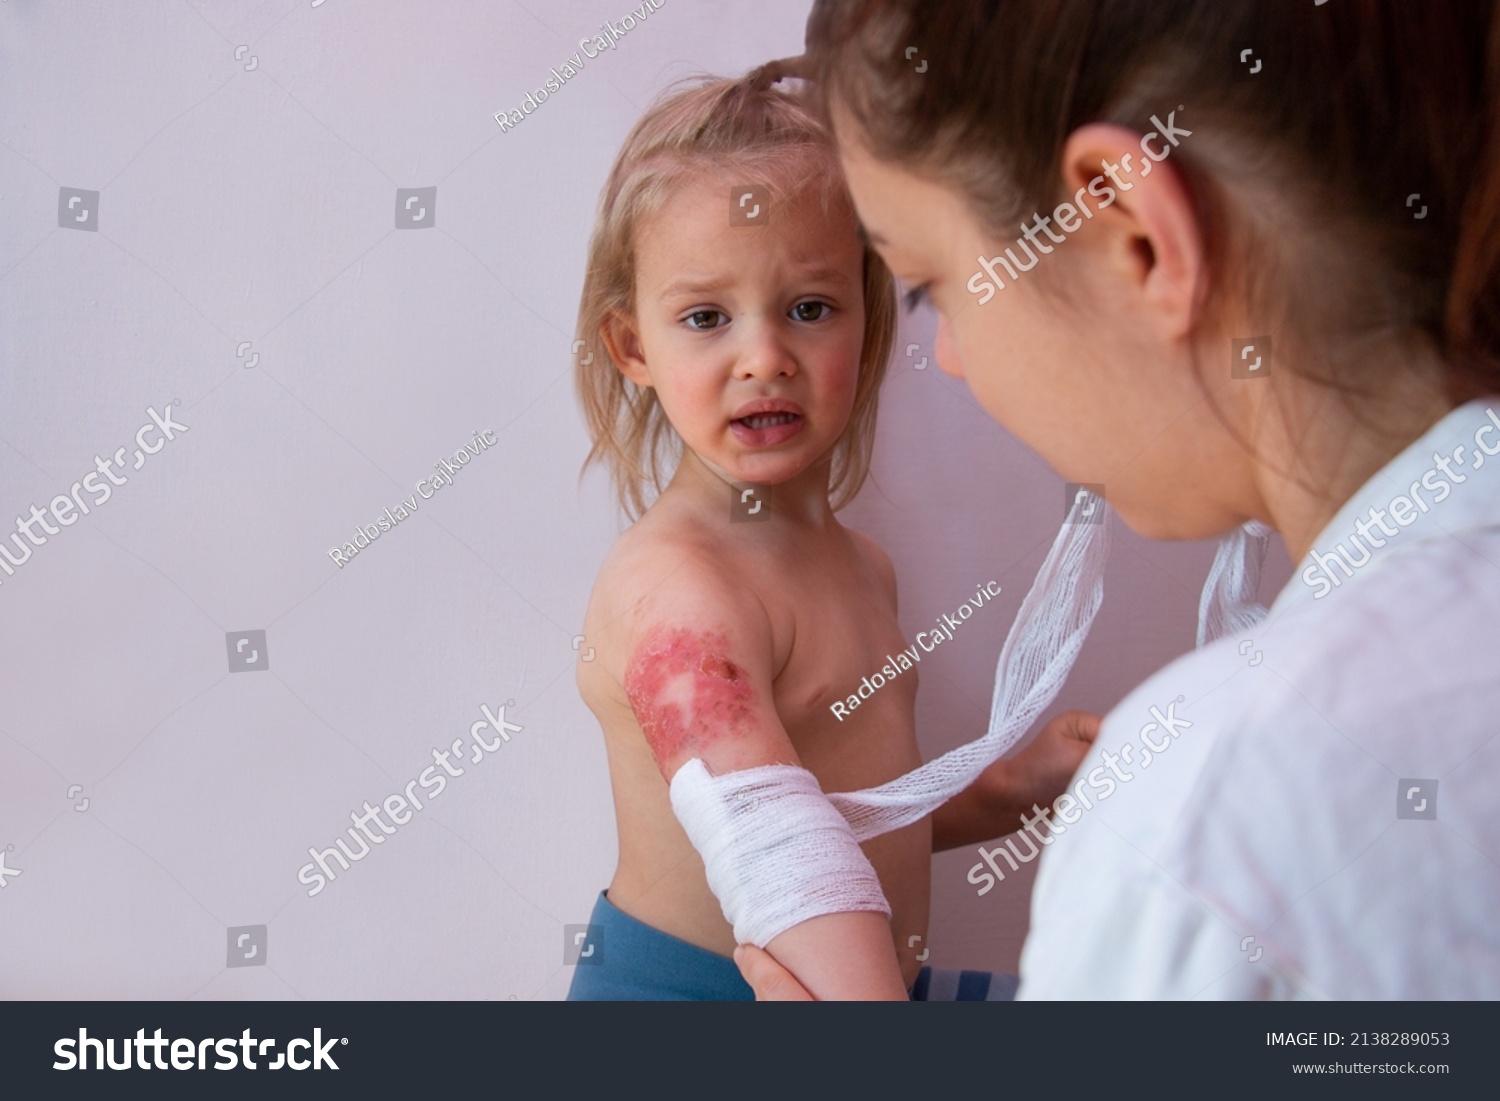 Child burn injury, burns treatment and healing, pediatrician is dressing wound on toddler arm with a sterile non-adhesive bandage #2138289053